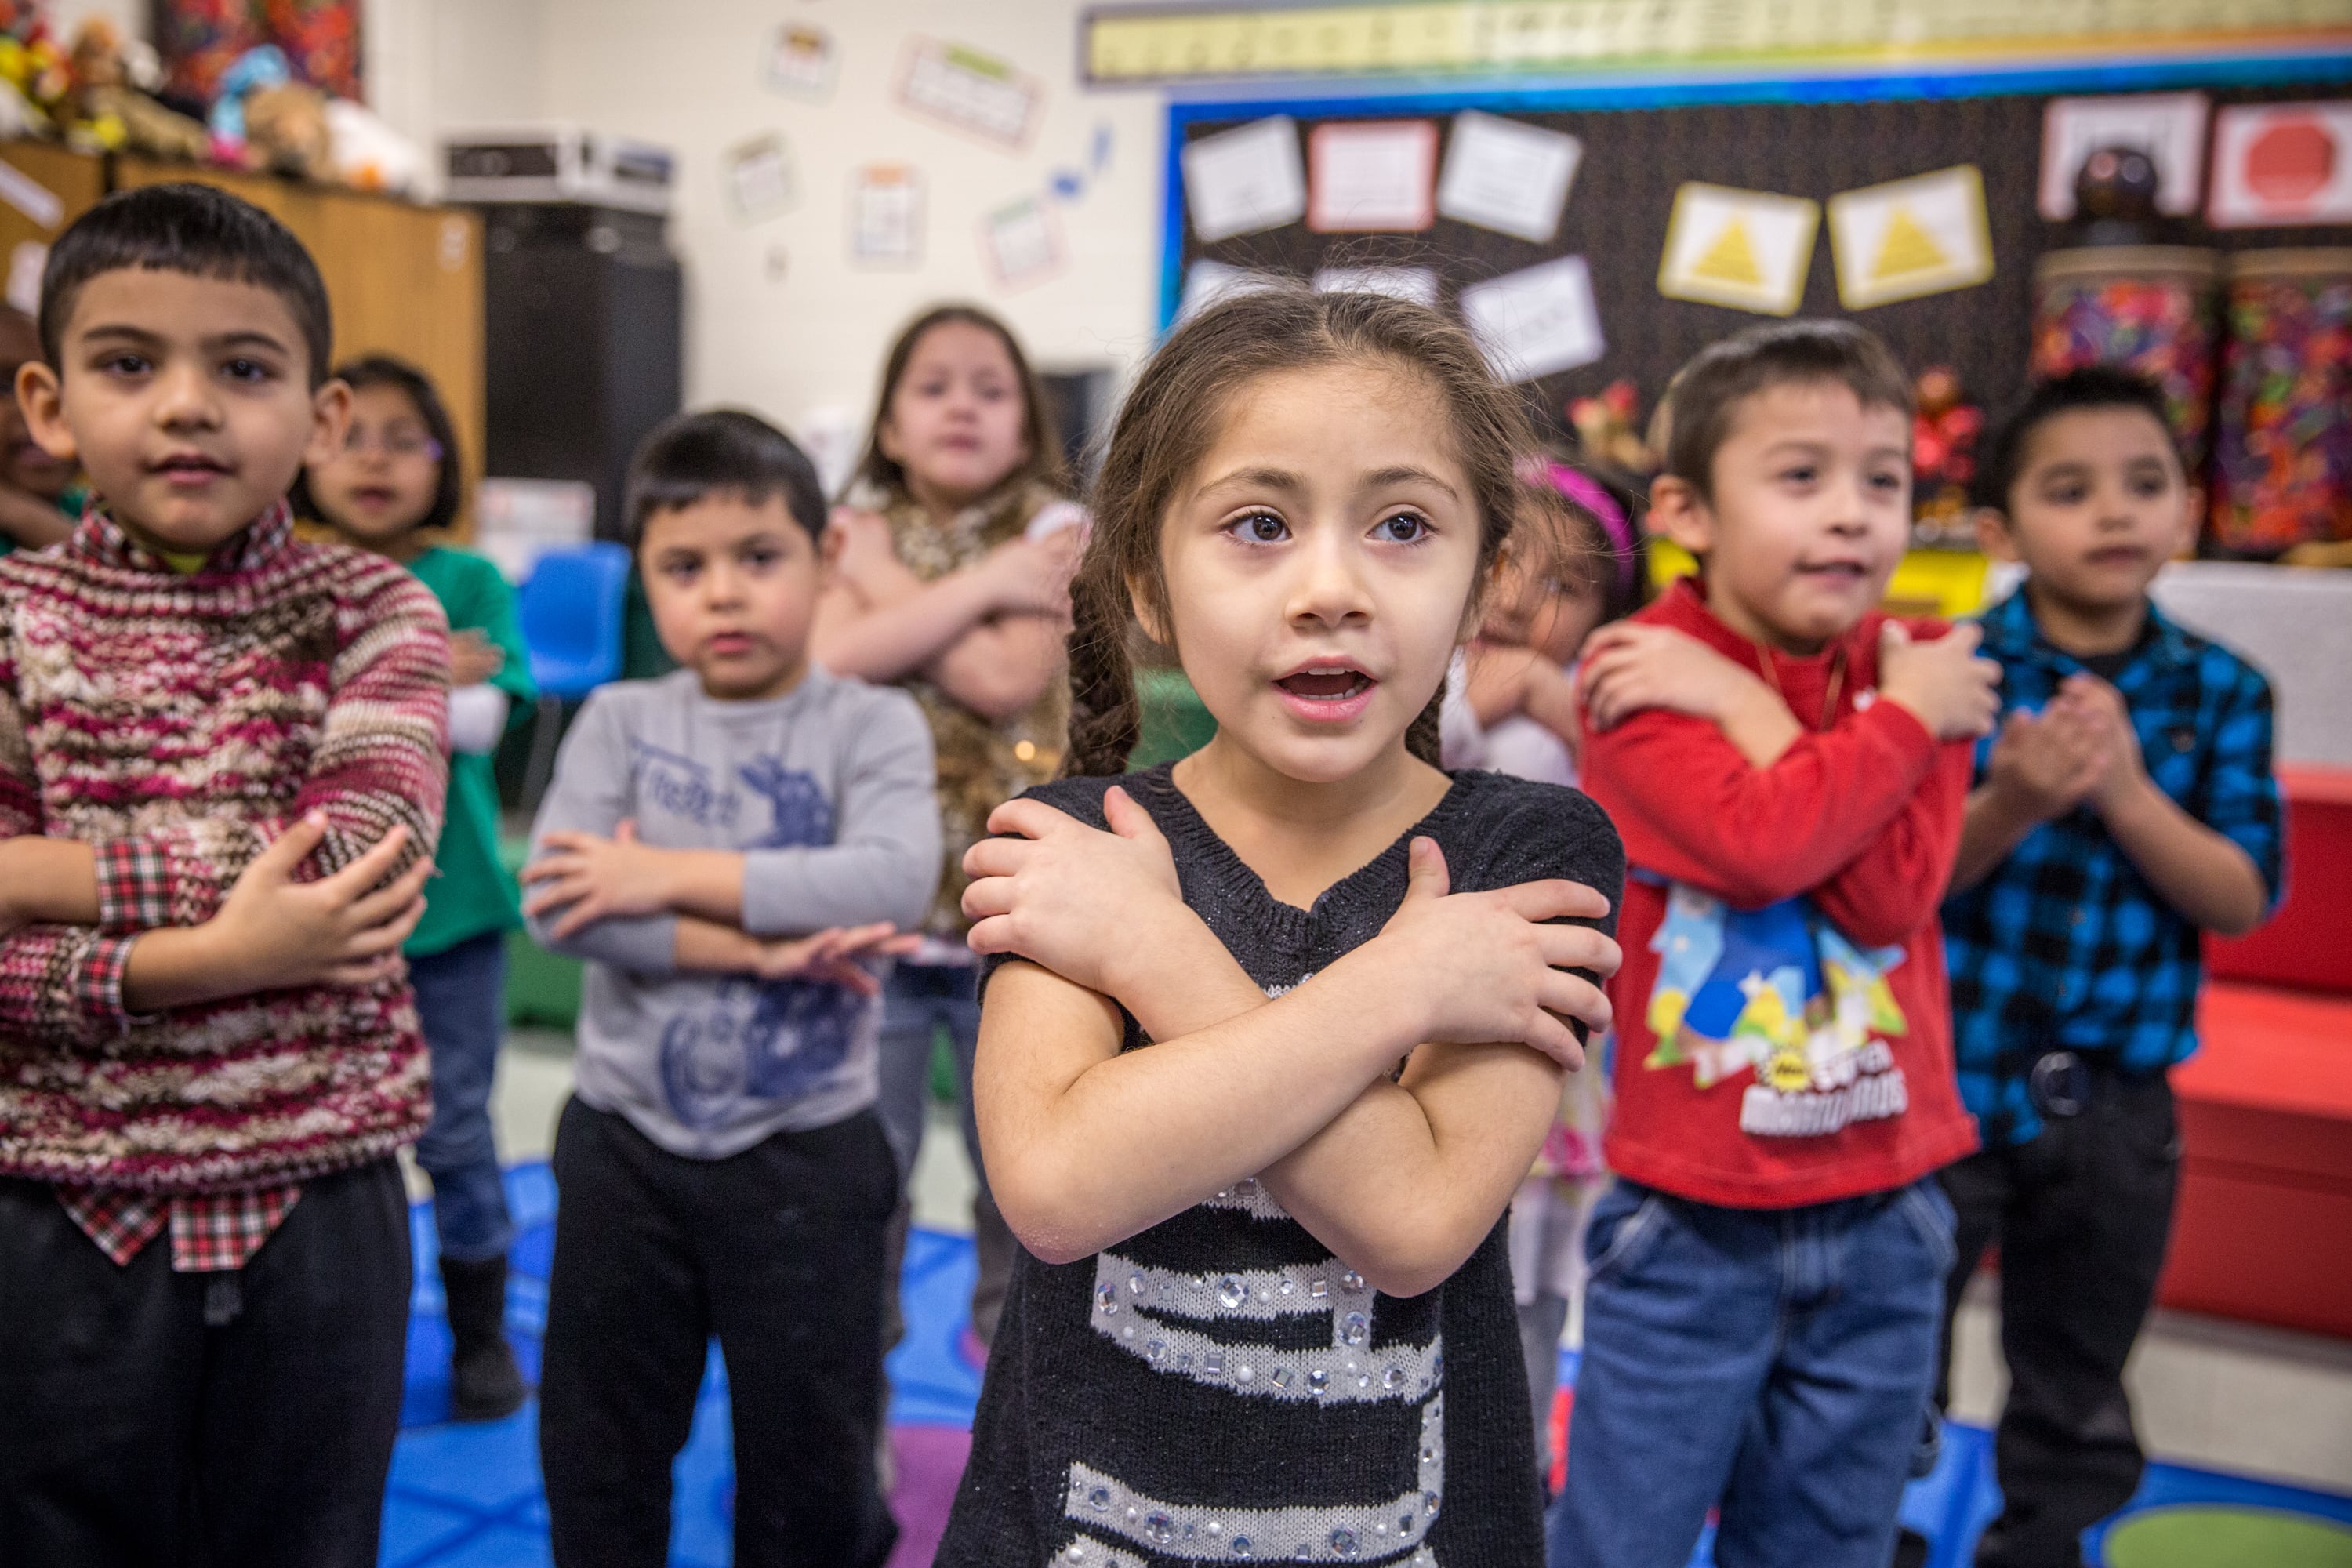 A group of young children touch their shoulders with opposite hands during a classroom activity.